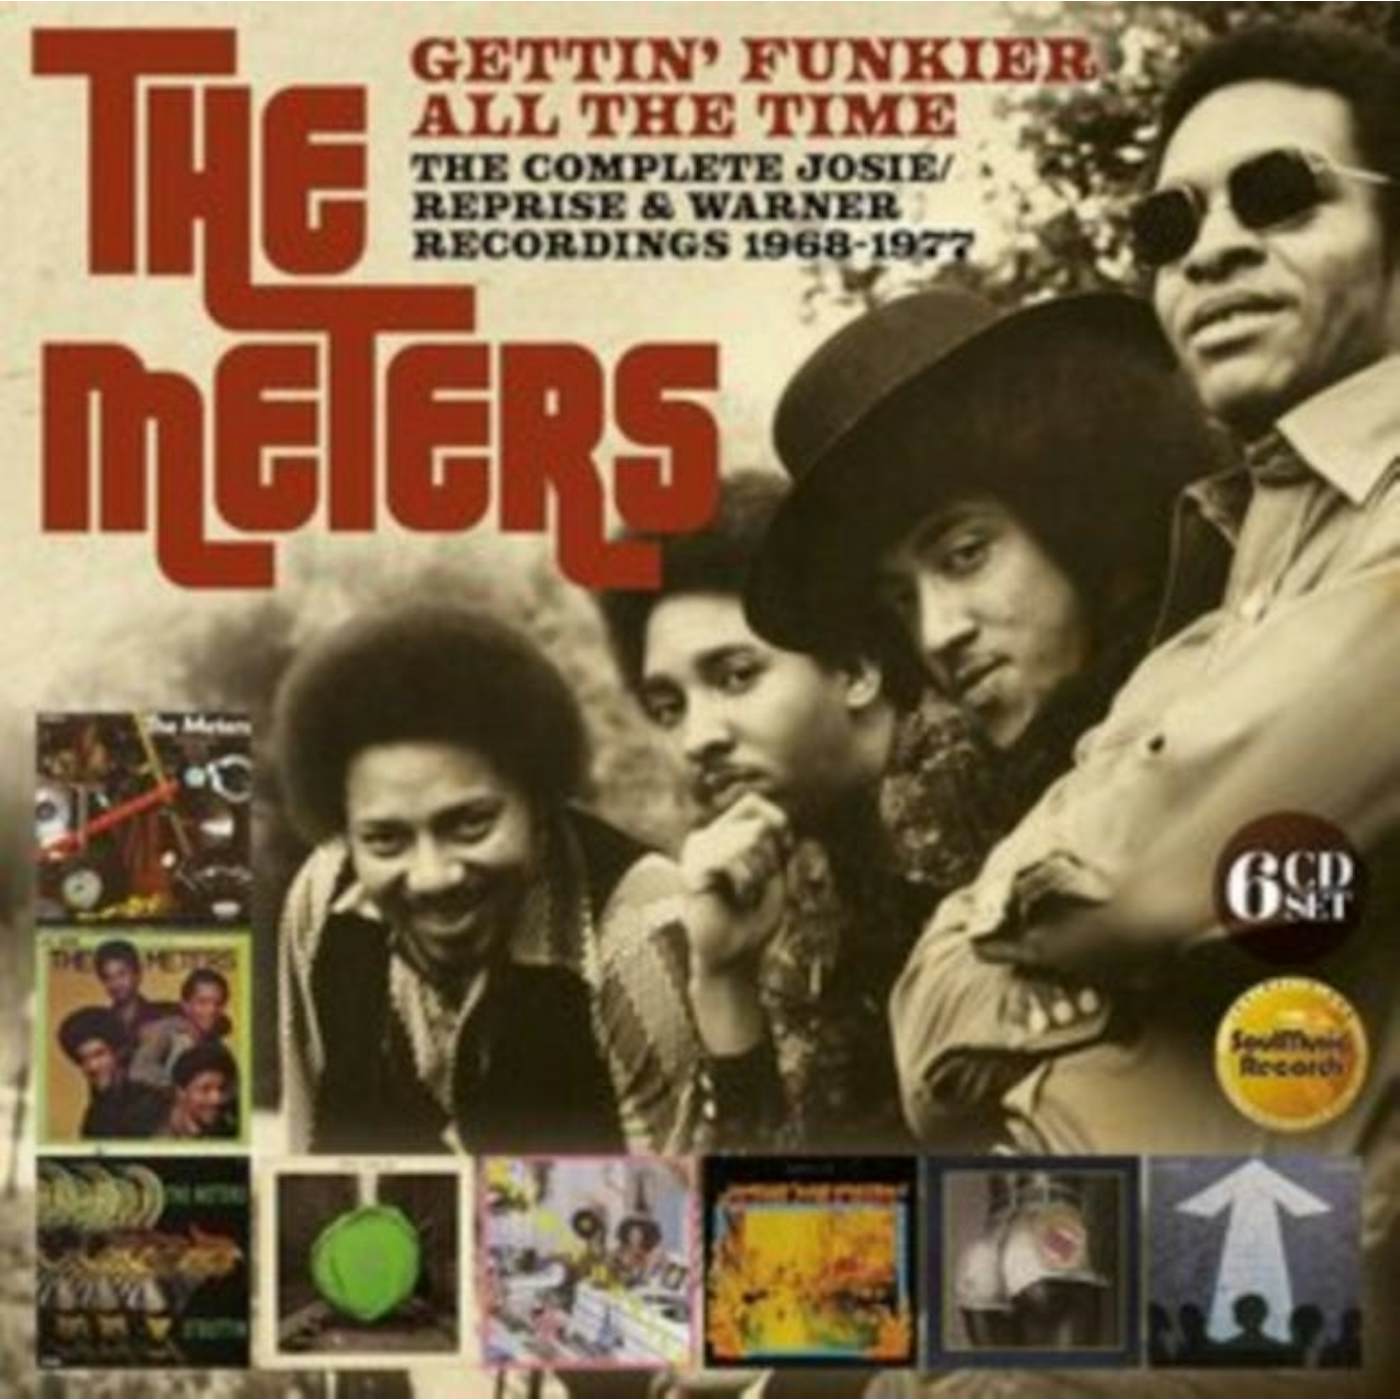 The Meters CD - Gettin' Funkier All The Time: The Complete Josie / Reprise & Warner Recordings (1968-1977)